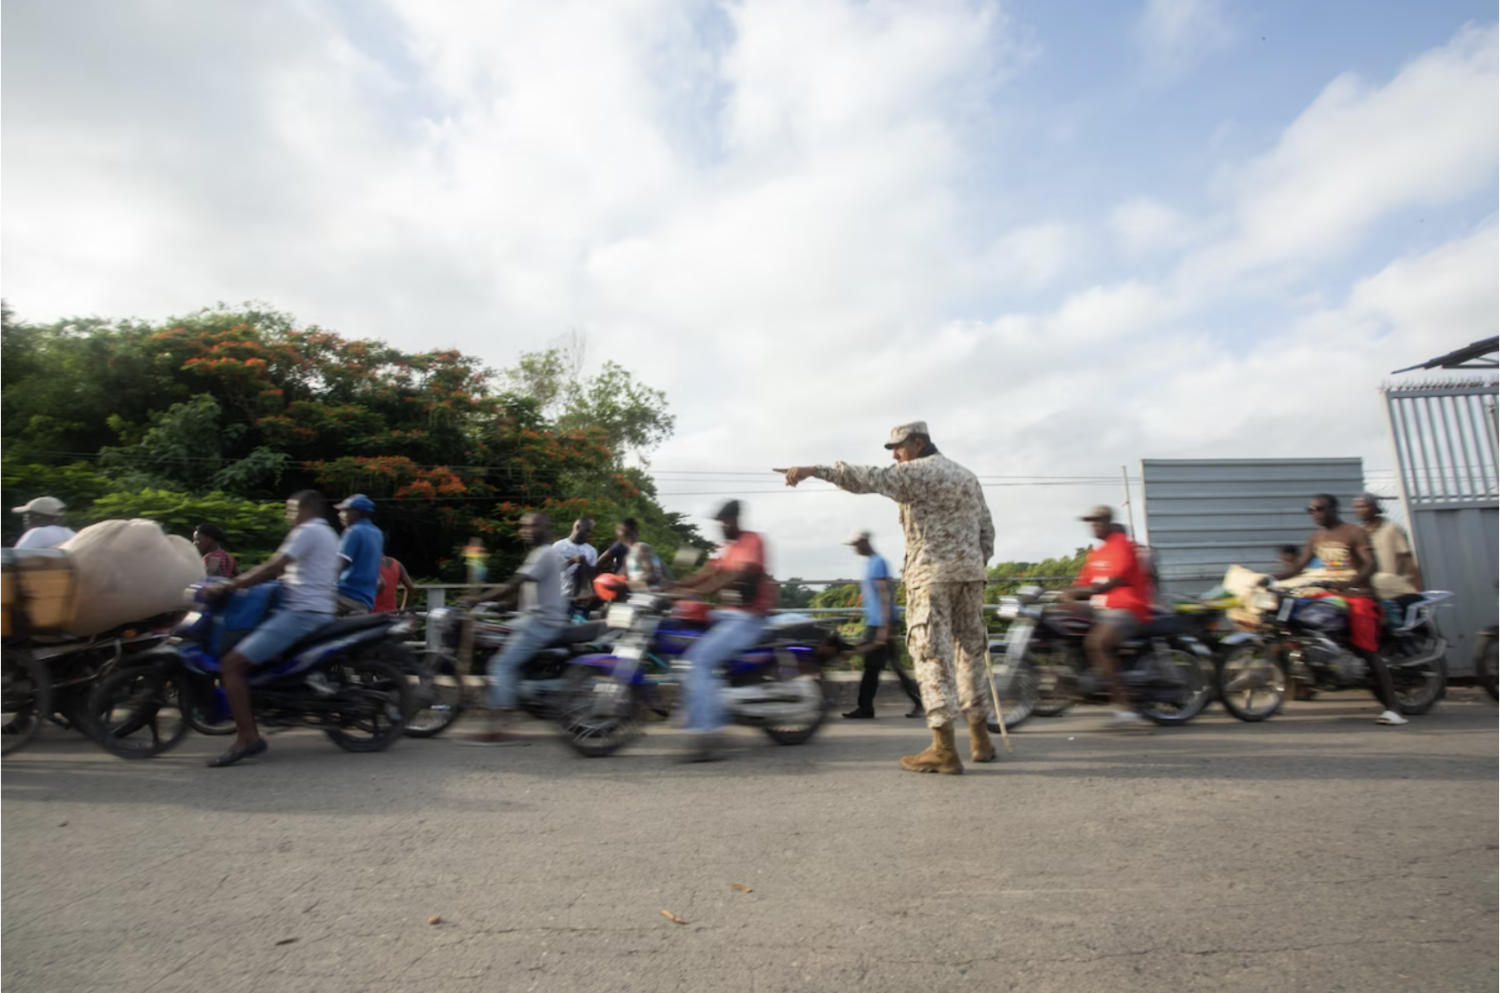 A member of the Dominican Republic's Specialized Border Security Corps directs pedestrians arriving from Haiti at the border bridge between Ouanaminthe, Haiti, and Dajabon, the Dominican Republic, in August. (Bloomberg via Getty Images)